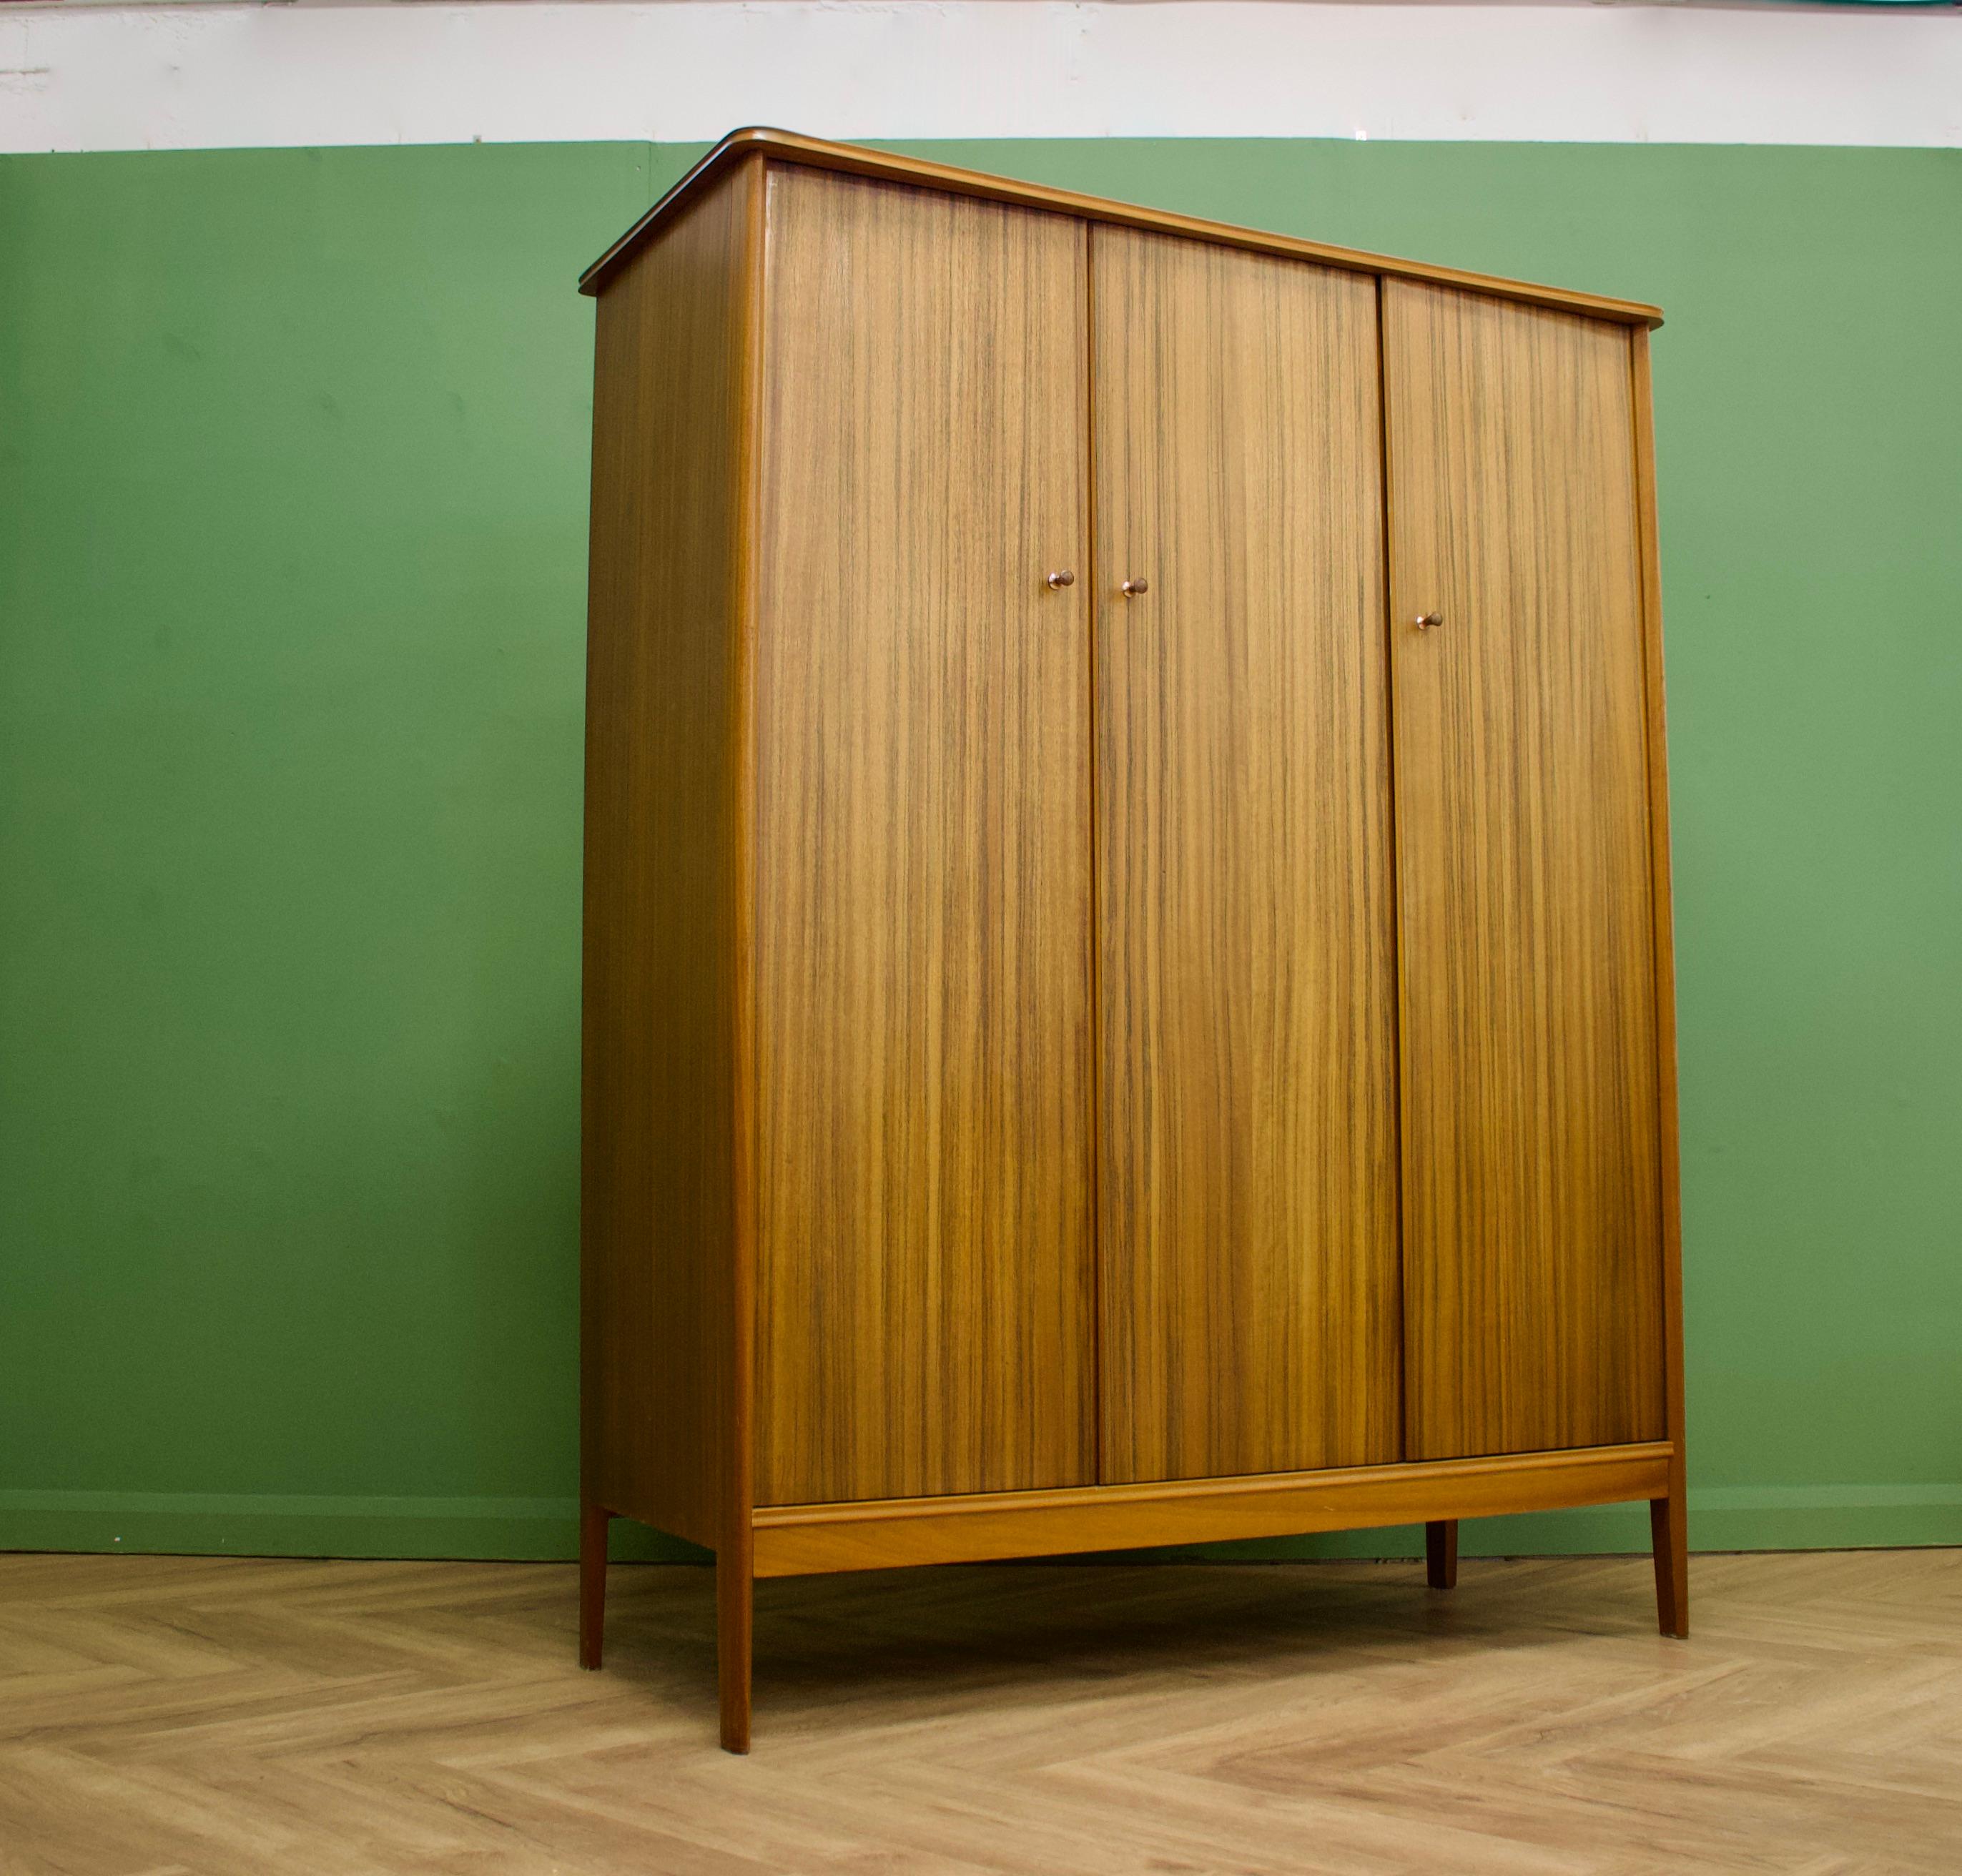 Mid-Century Modern triple door wardrobe by Vanson 
Manufactured in the UK.
Made from solid teak and real teak veneers.
Featuring 2 rails, shoe rail and a shelf
This wardrobe dismantles.

